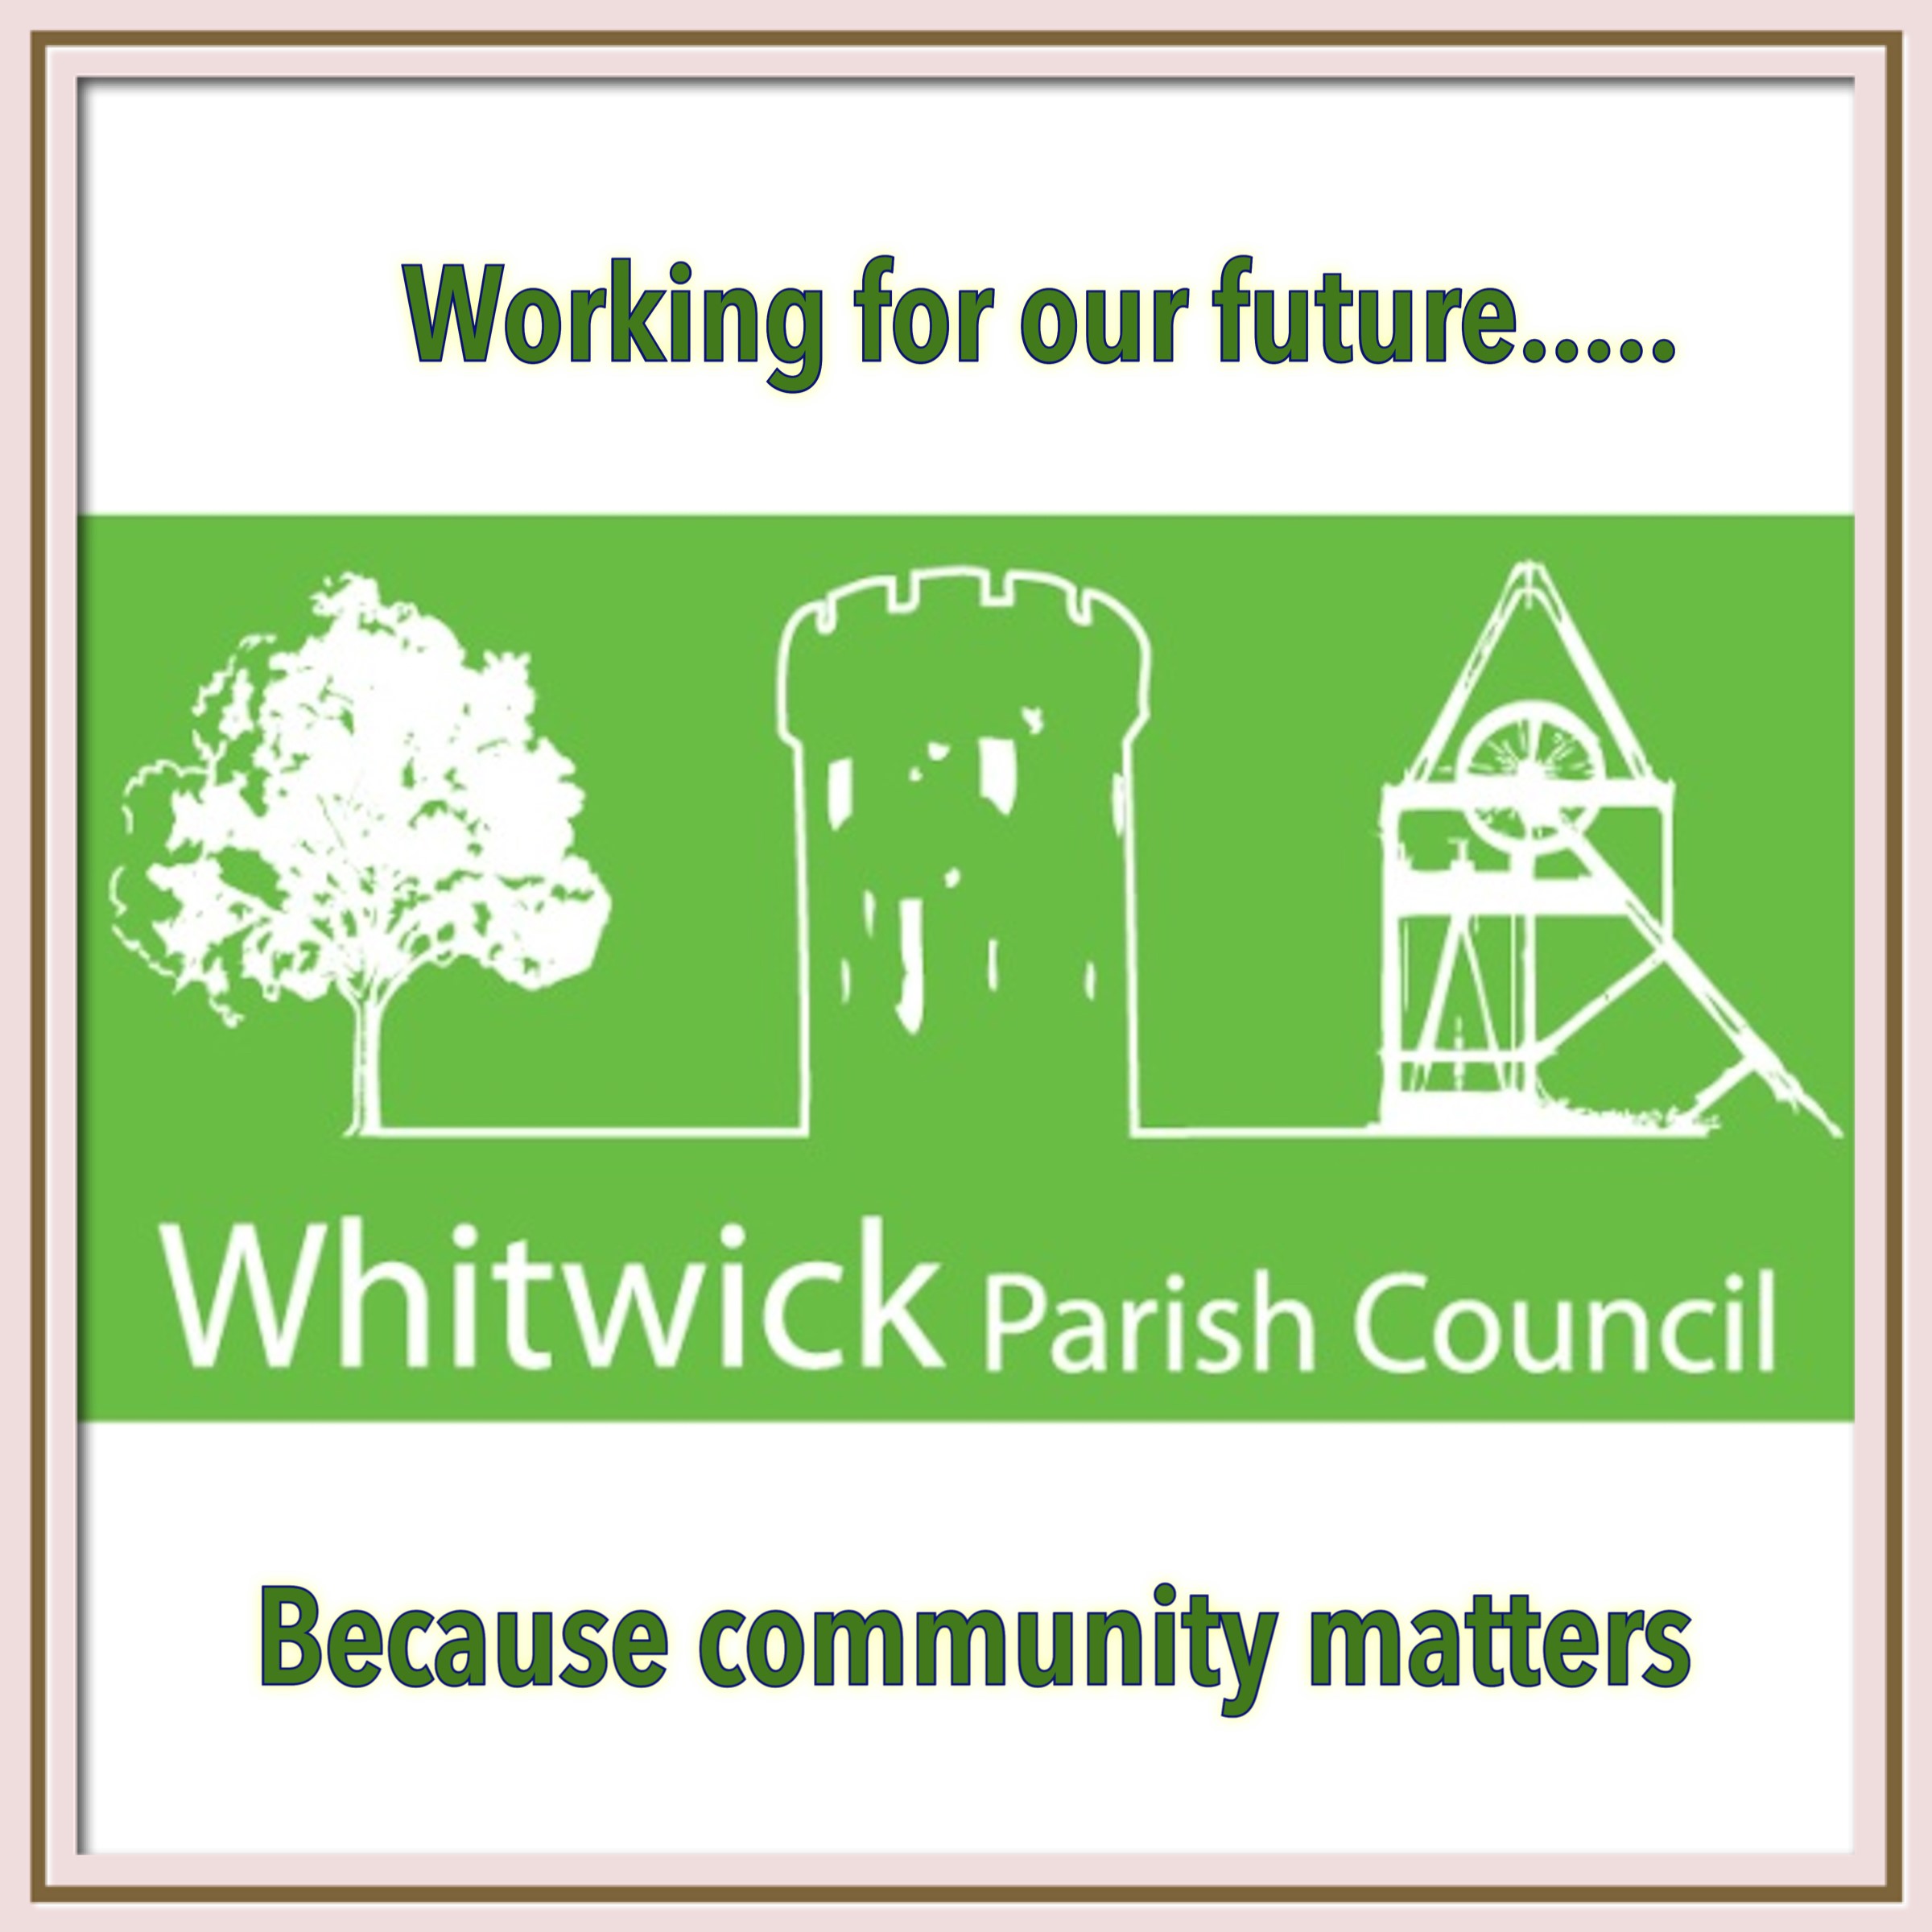 Whitwick Parish Council - working for our future, because community matters